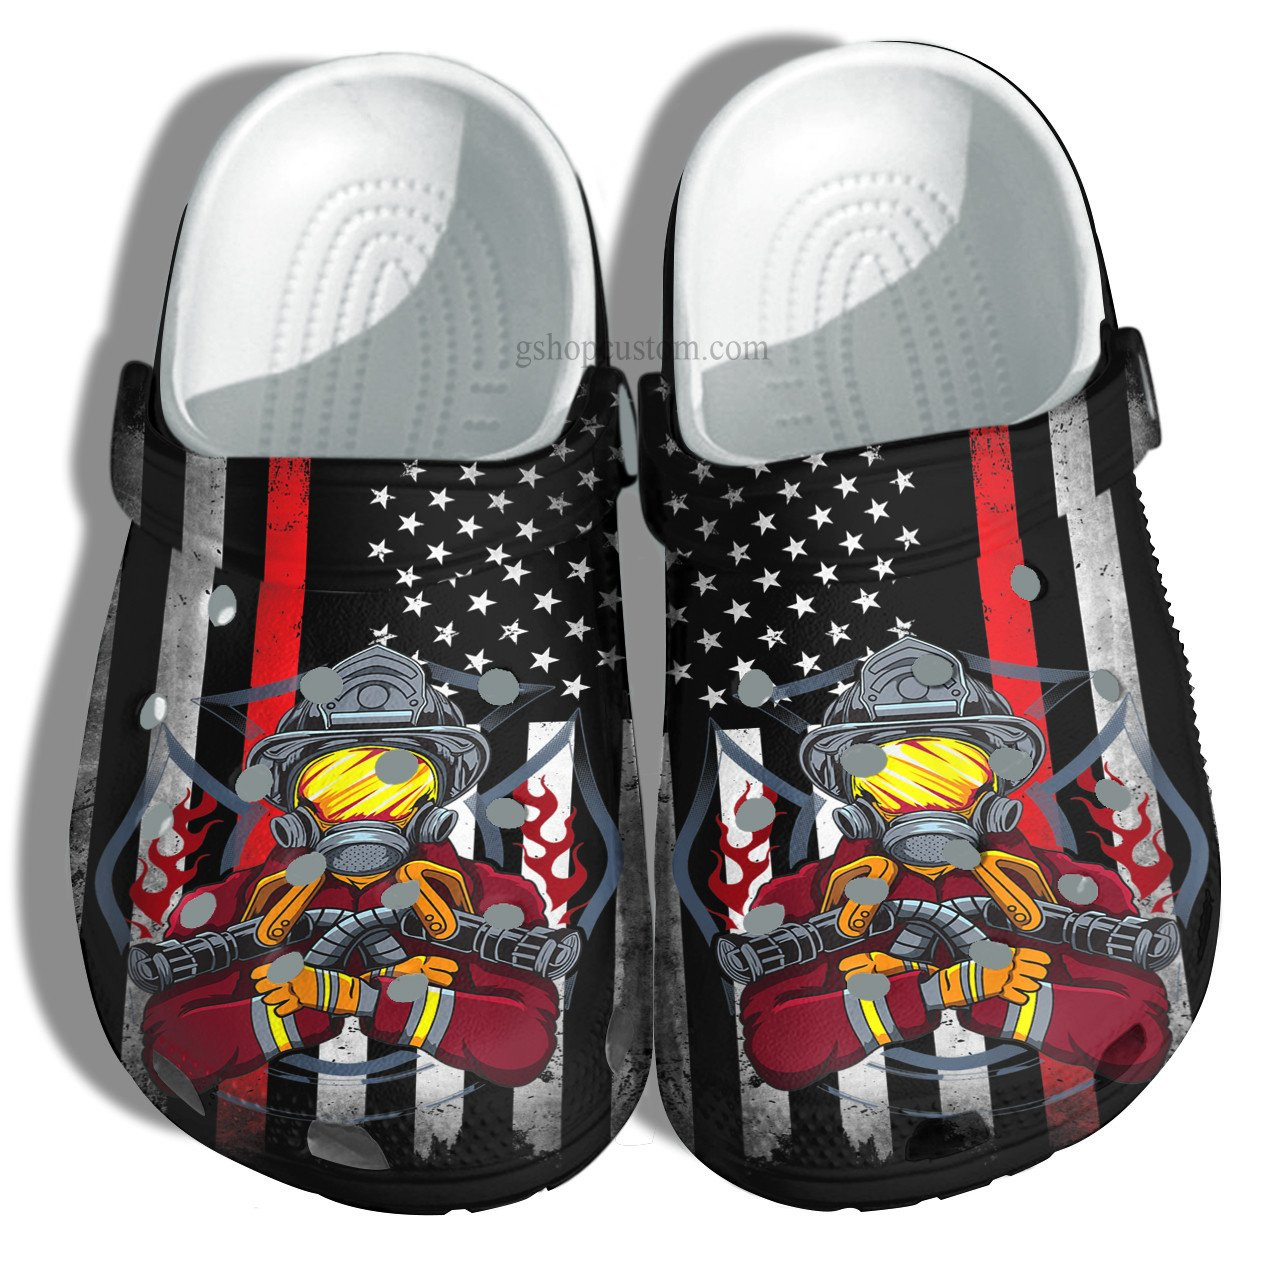 Firefighter Usa Flag Crocs Shoes – Firefighter Army Shoes Croc Clogs ...